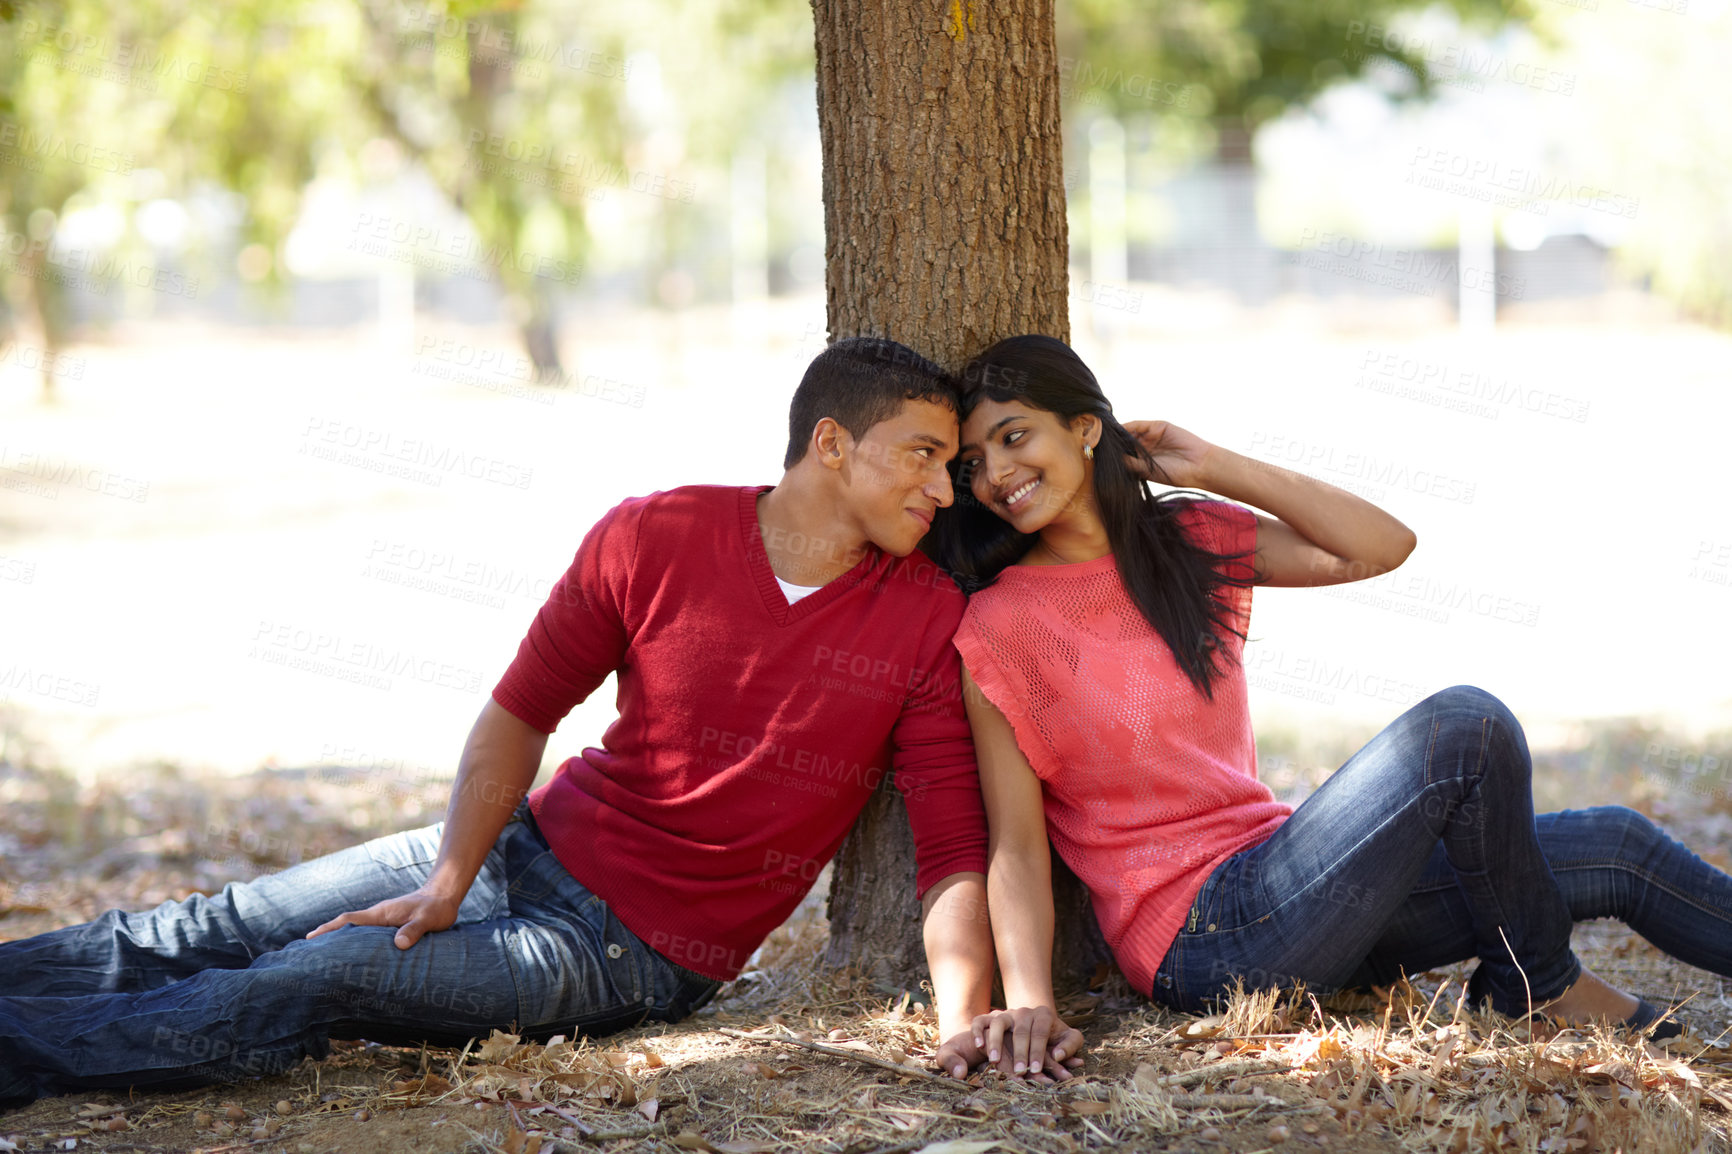 Buy stock photo Shot of an affectionate young couple sitting together under a tree in the park